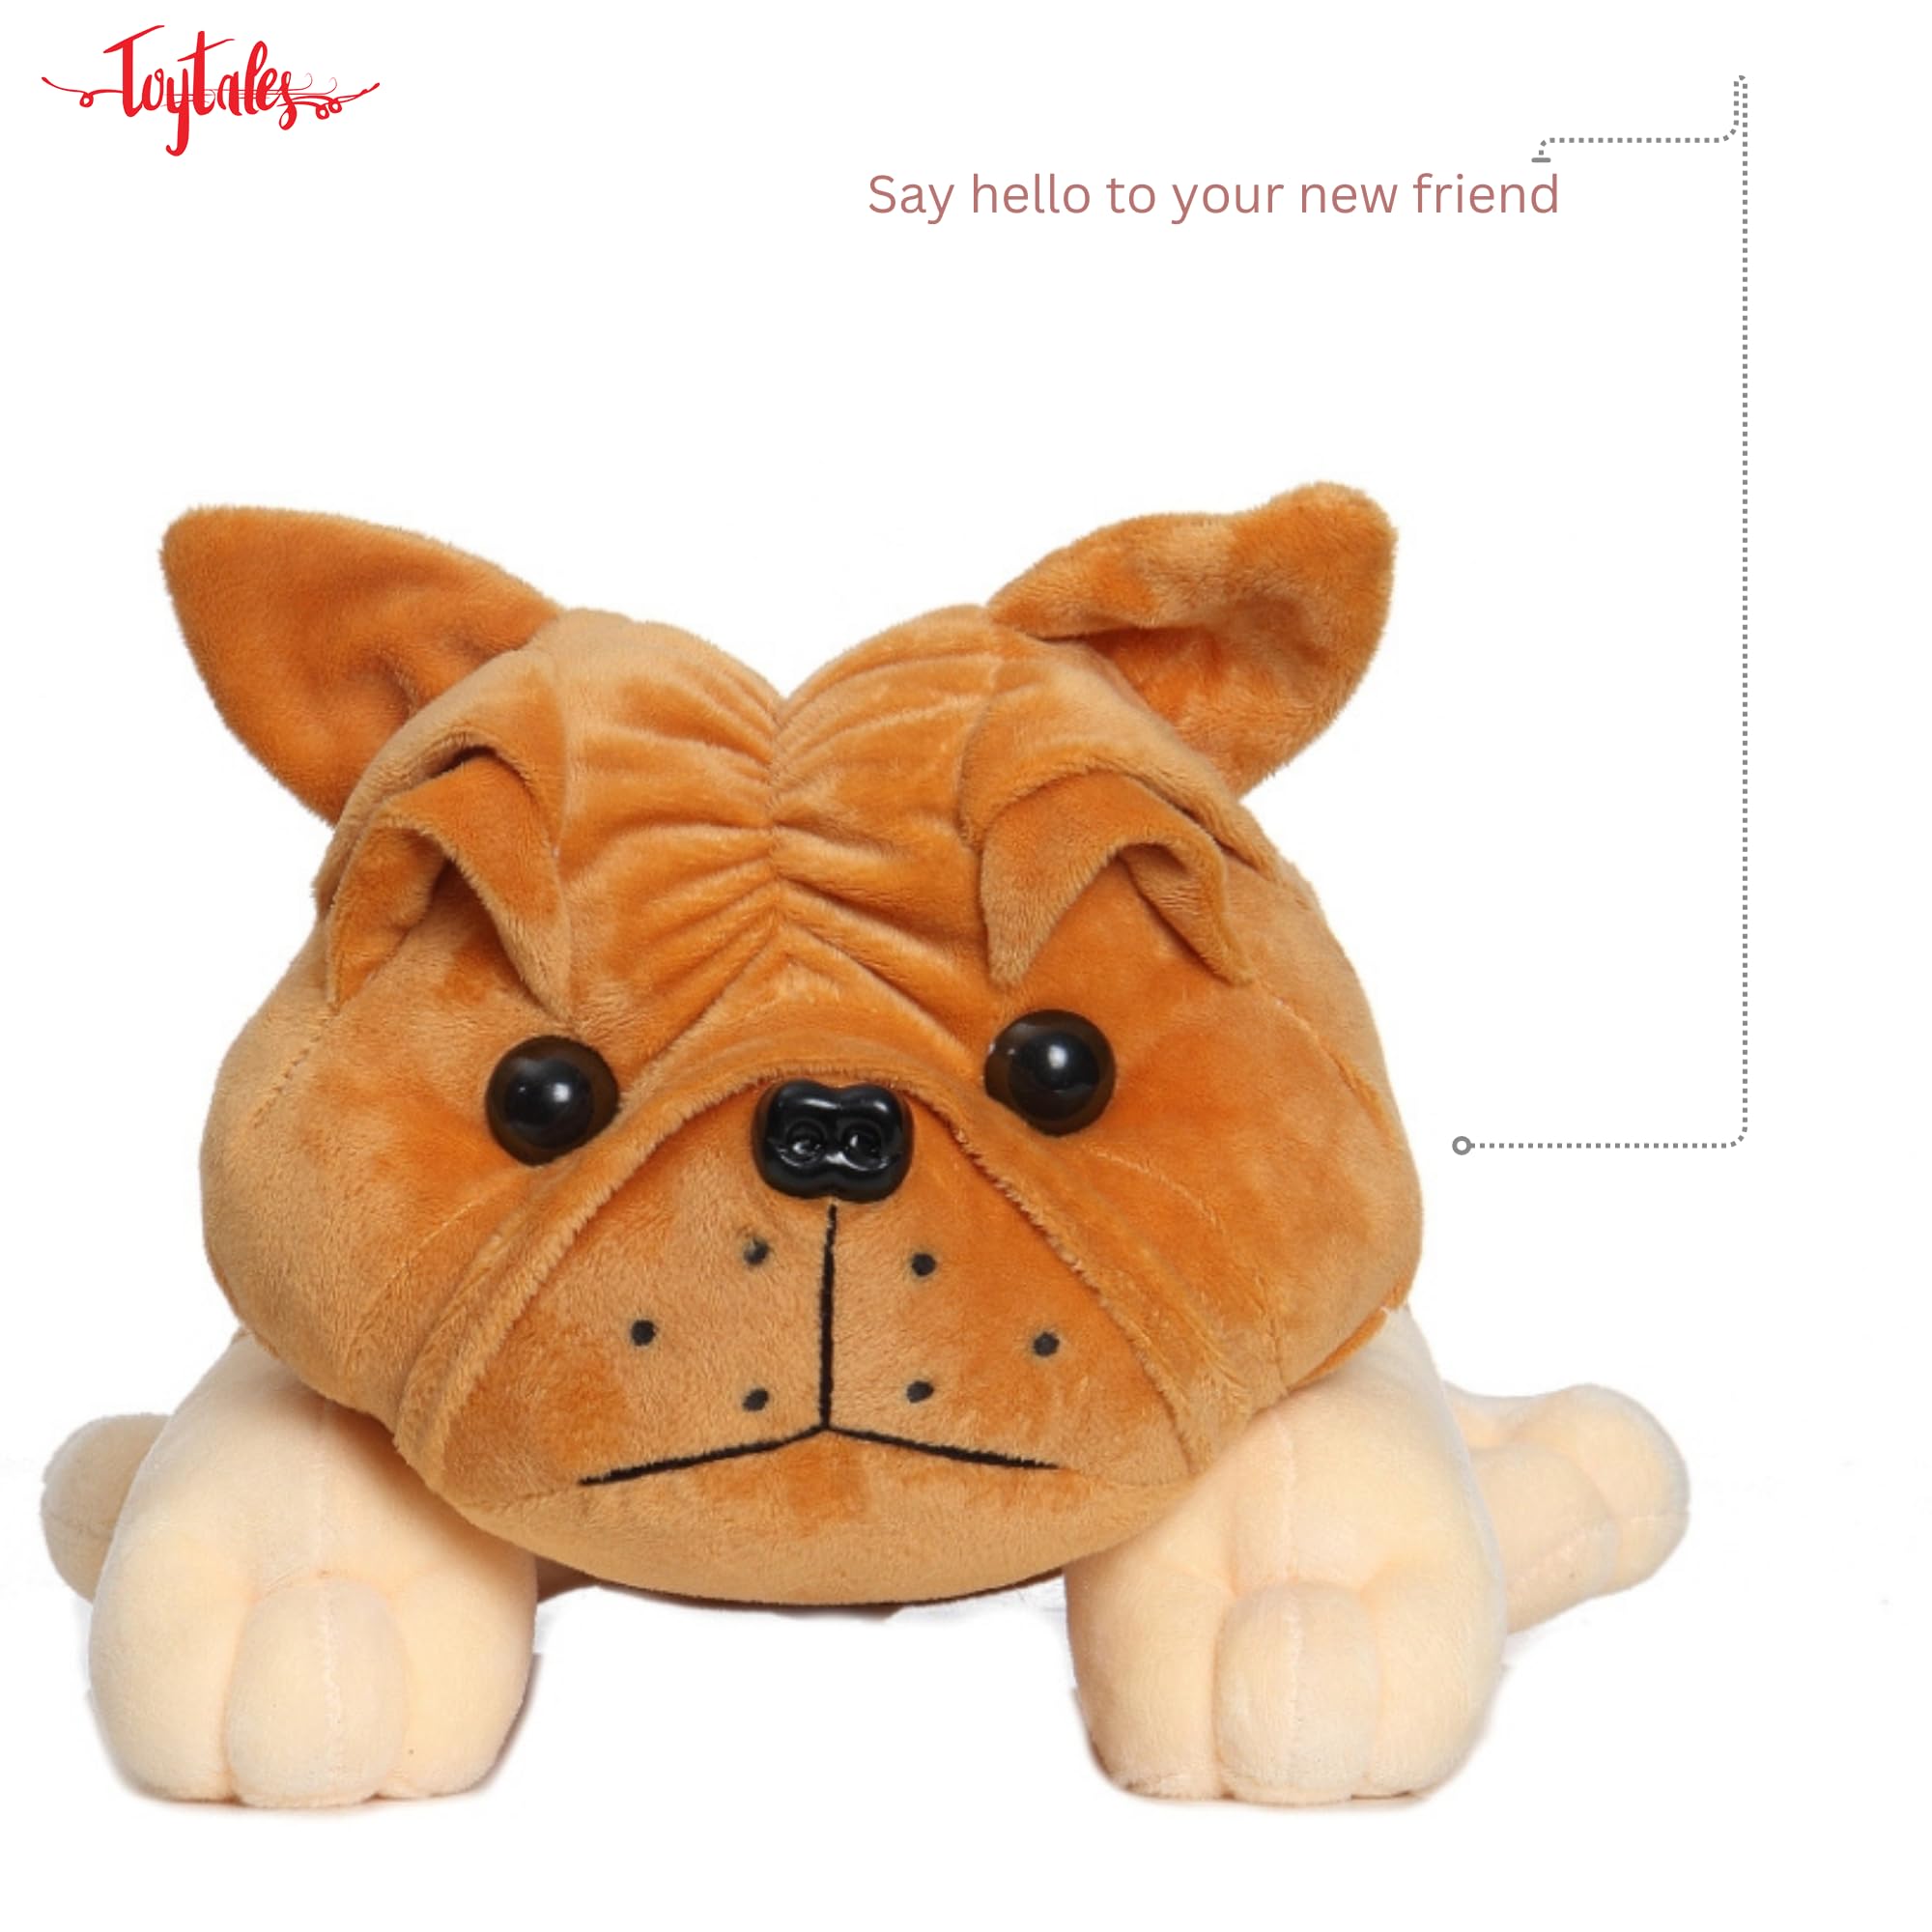 Bull Dog (60 cm) Huggable Plush Soft Toy for Girls & Boys | Stuffed Animal Soft Toy for Kids | Small Size Cute Plush Toy ISI Certified (Light Brown Color)